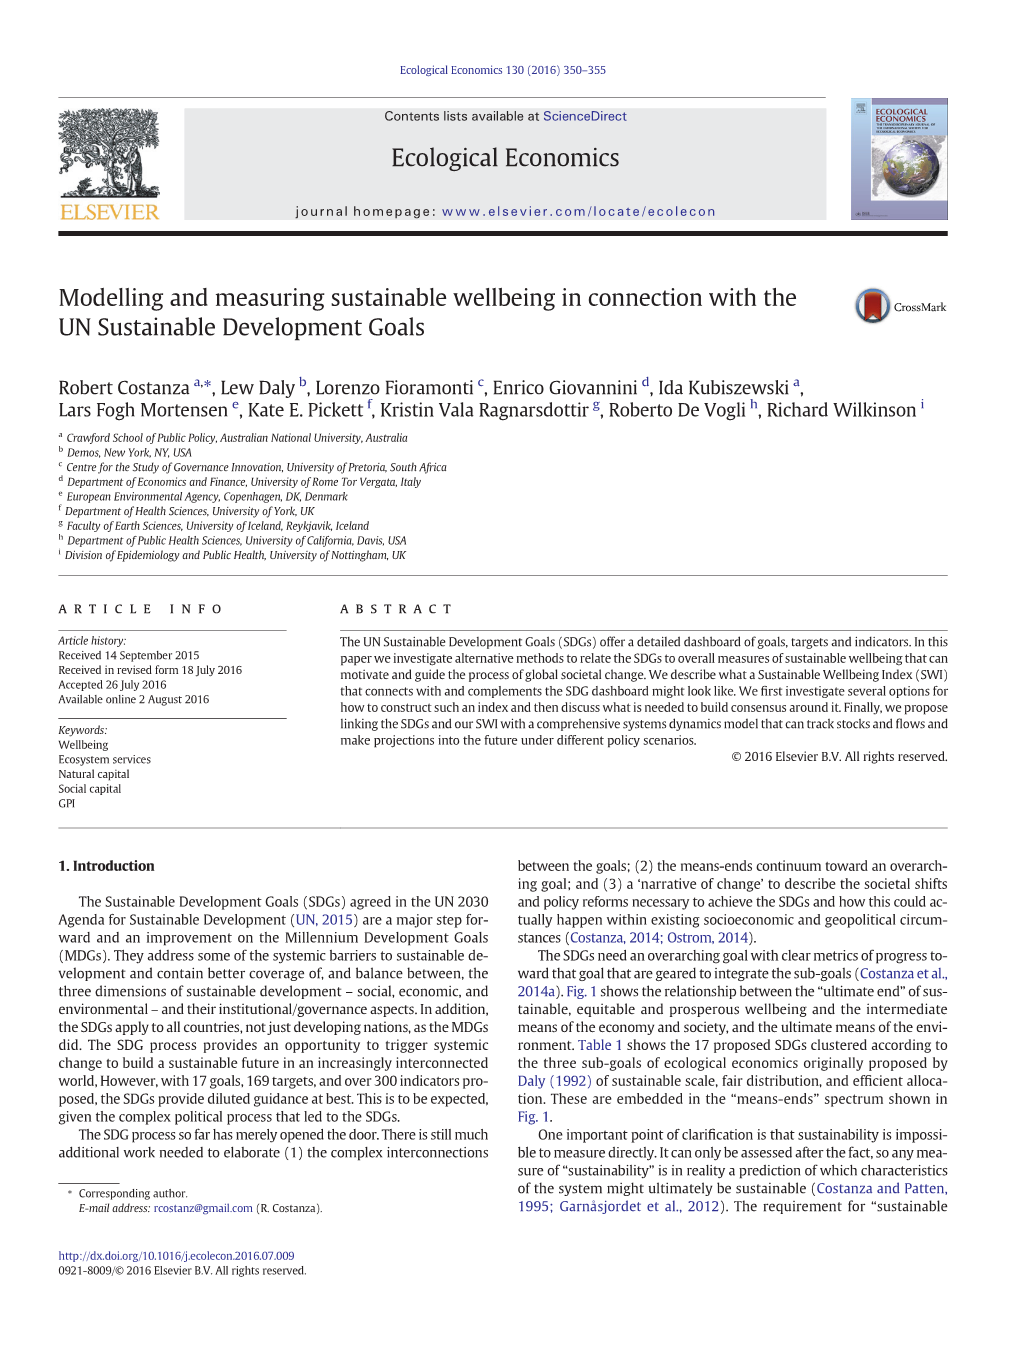 Modelling and Measuring Sustainable Wellbeing in Connection with the UN Sustainable Development Goals